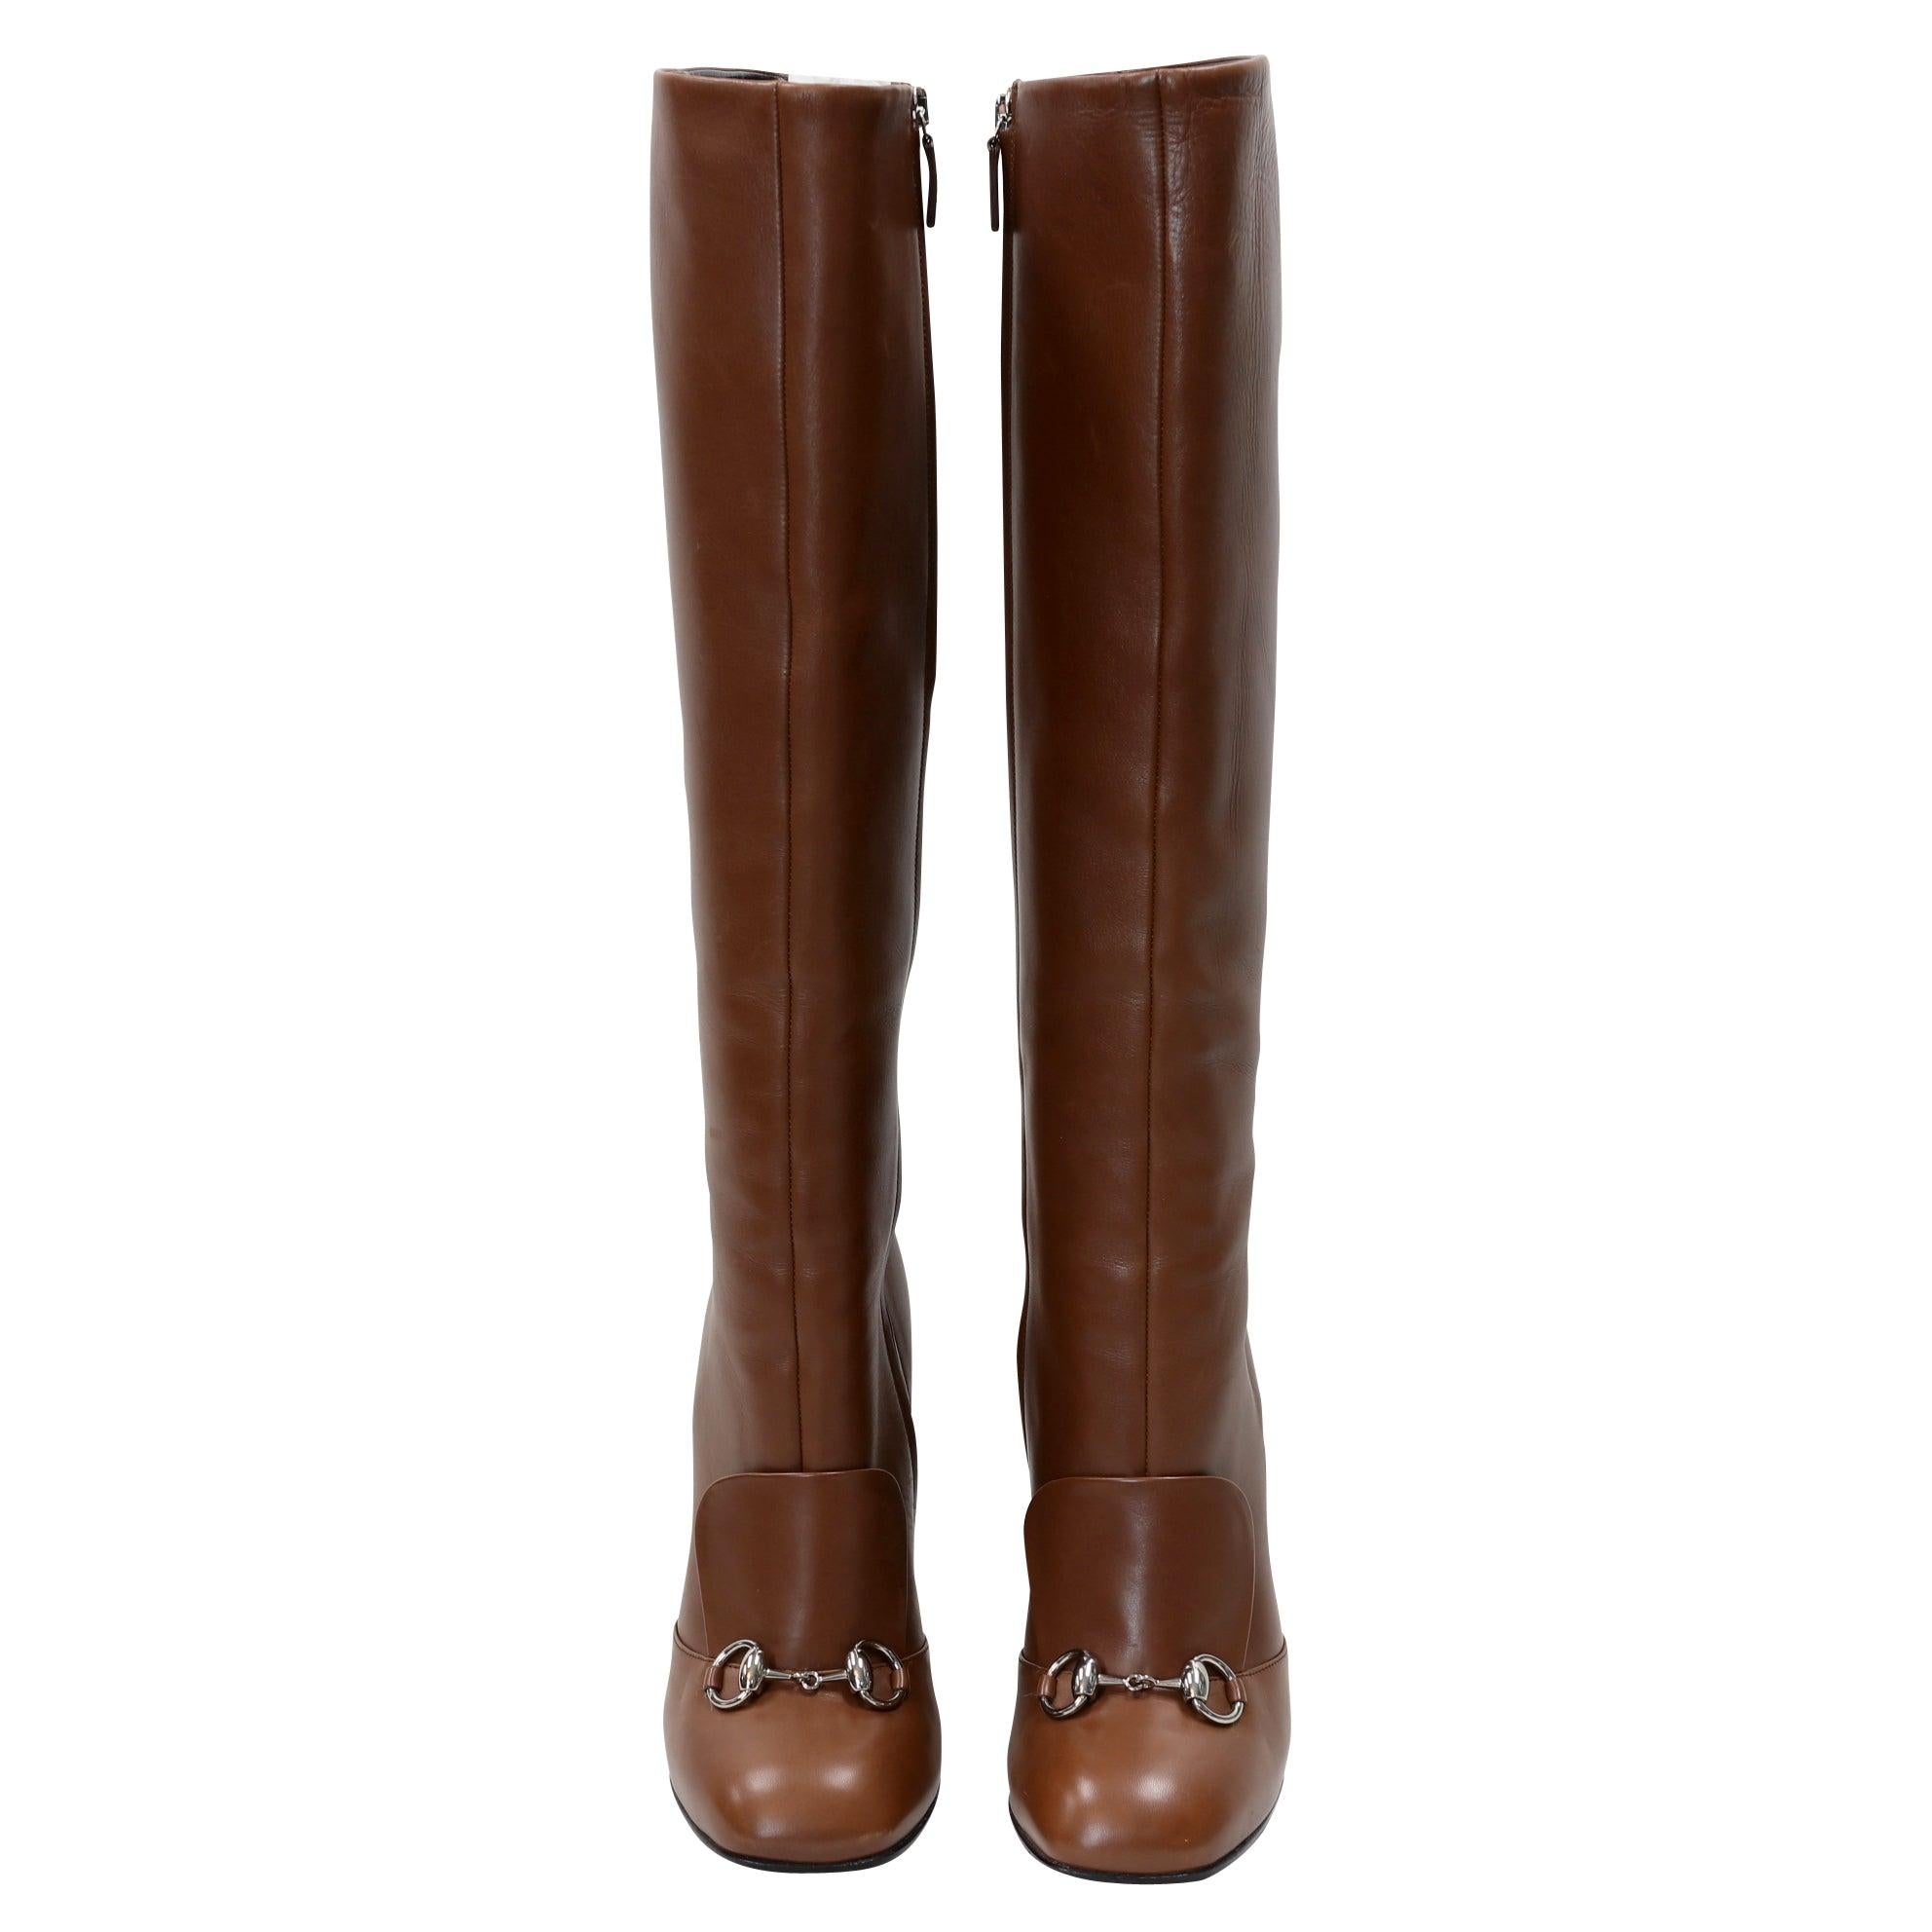 Gucci Brown Leather Horsebit Knee High Riding Boots 39.5 GG-S1111P-0001 ...